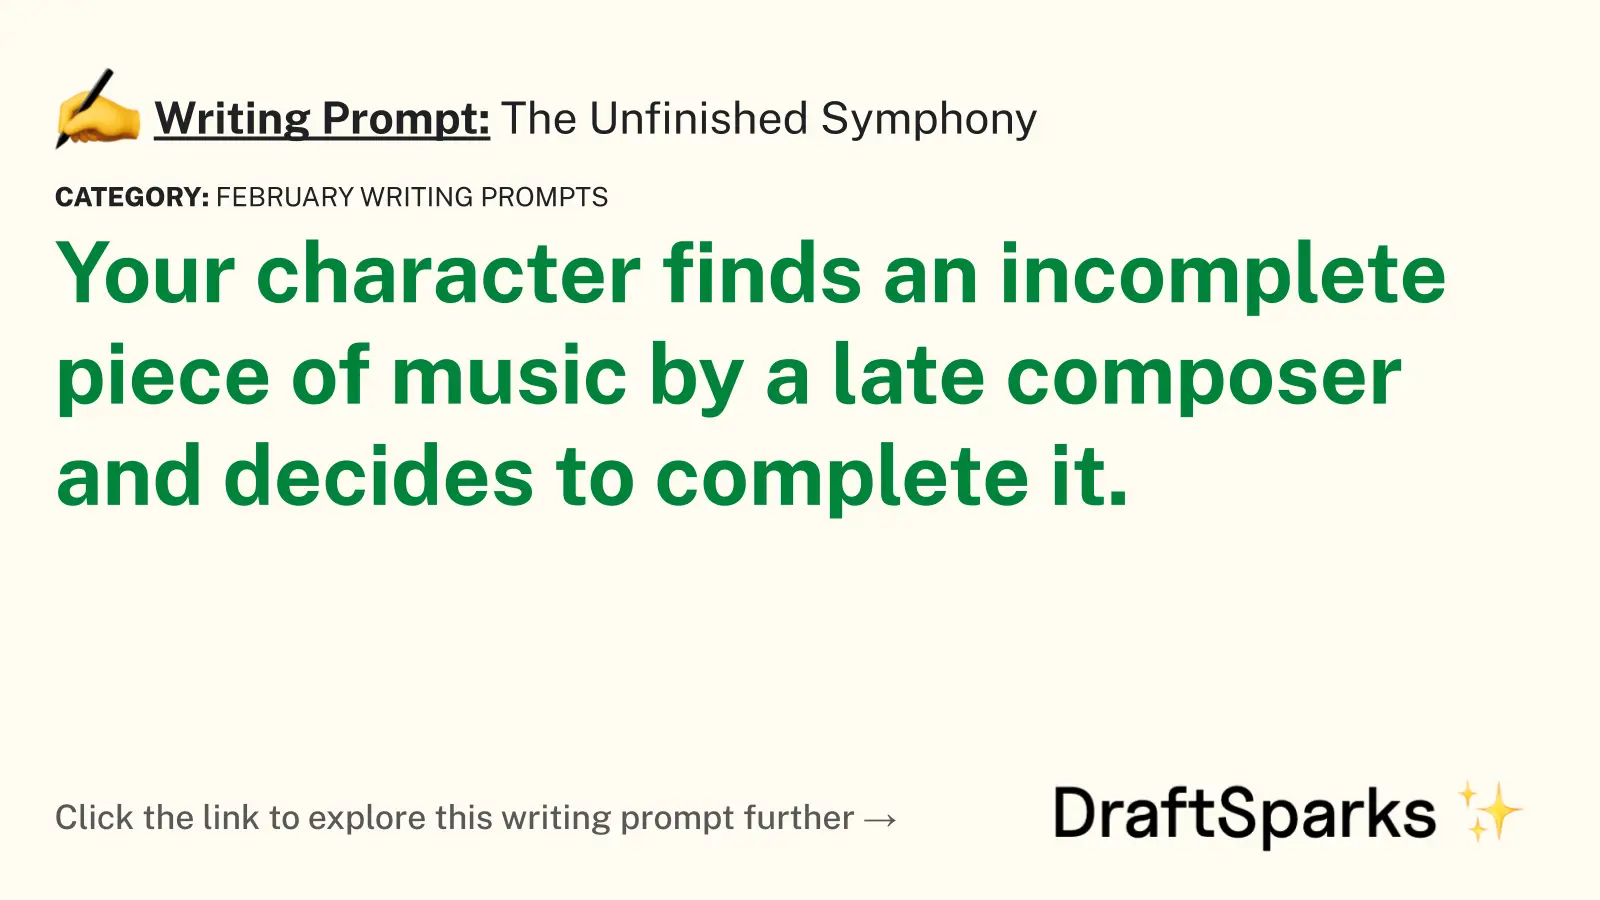 The Unfinished Symphony